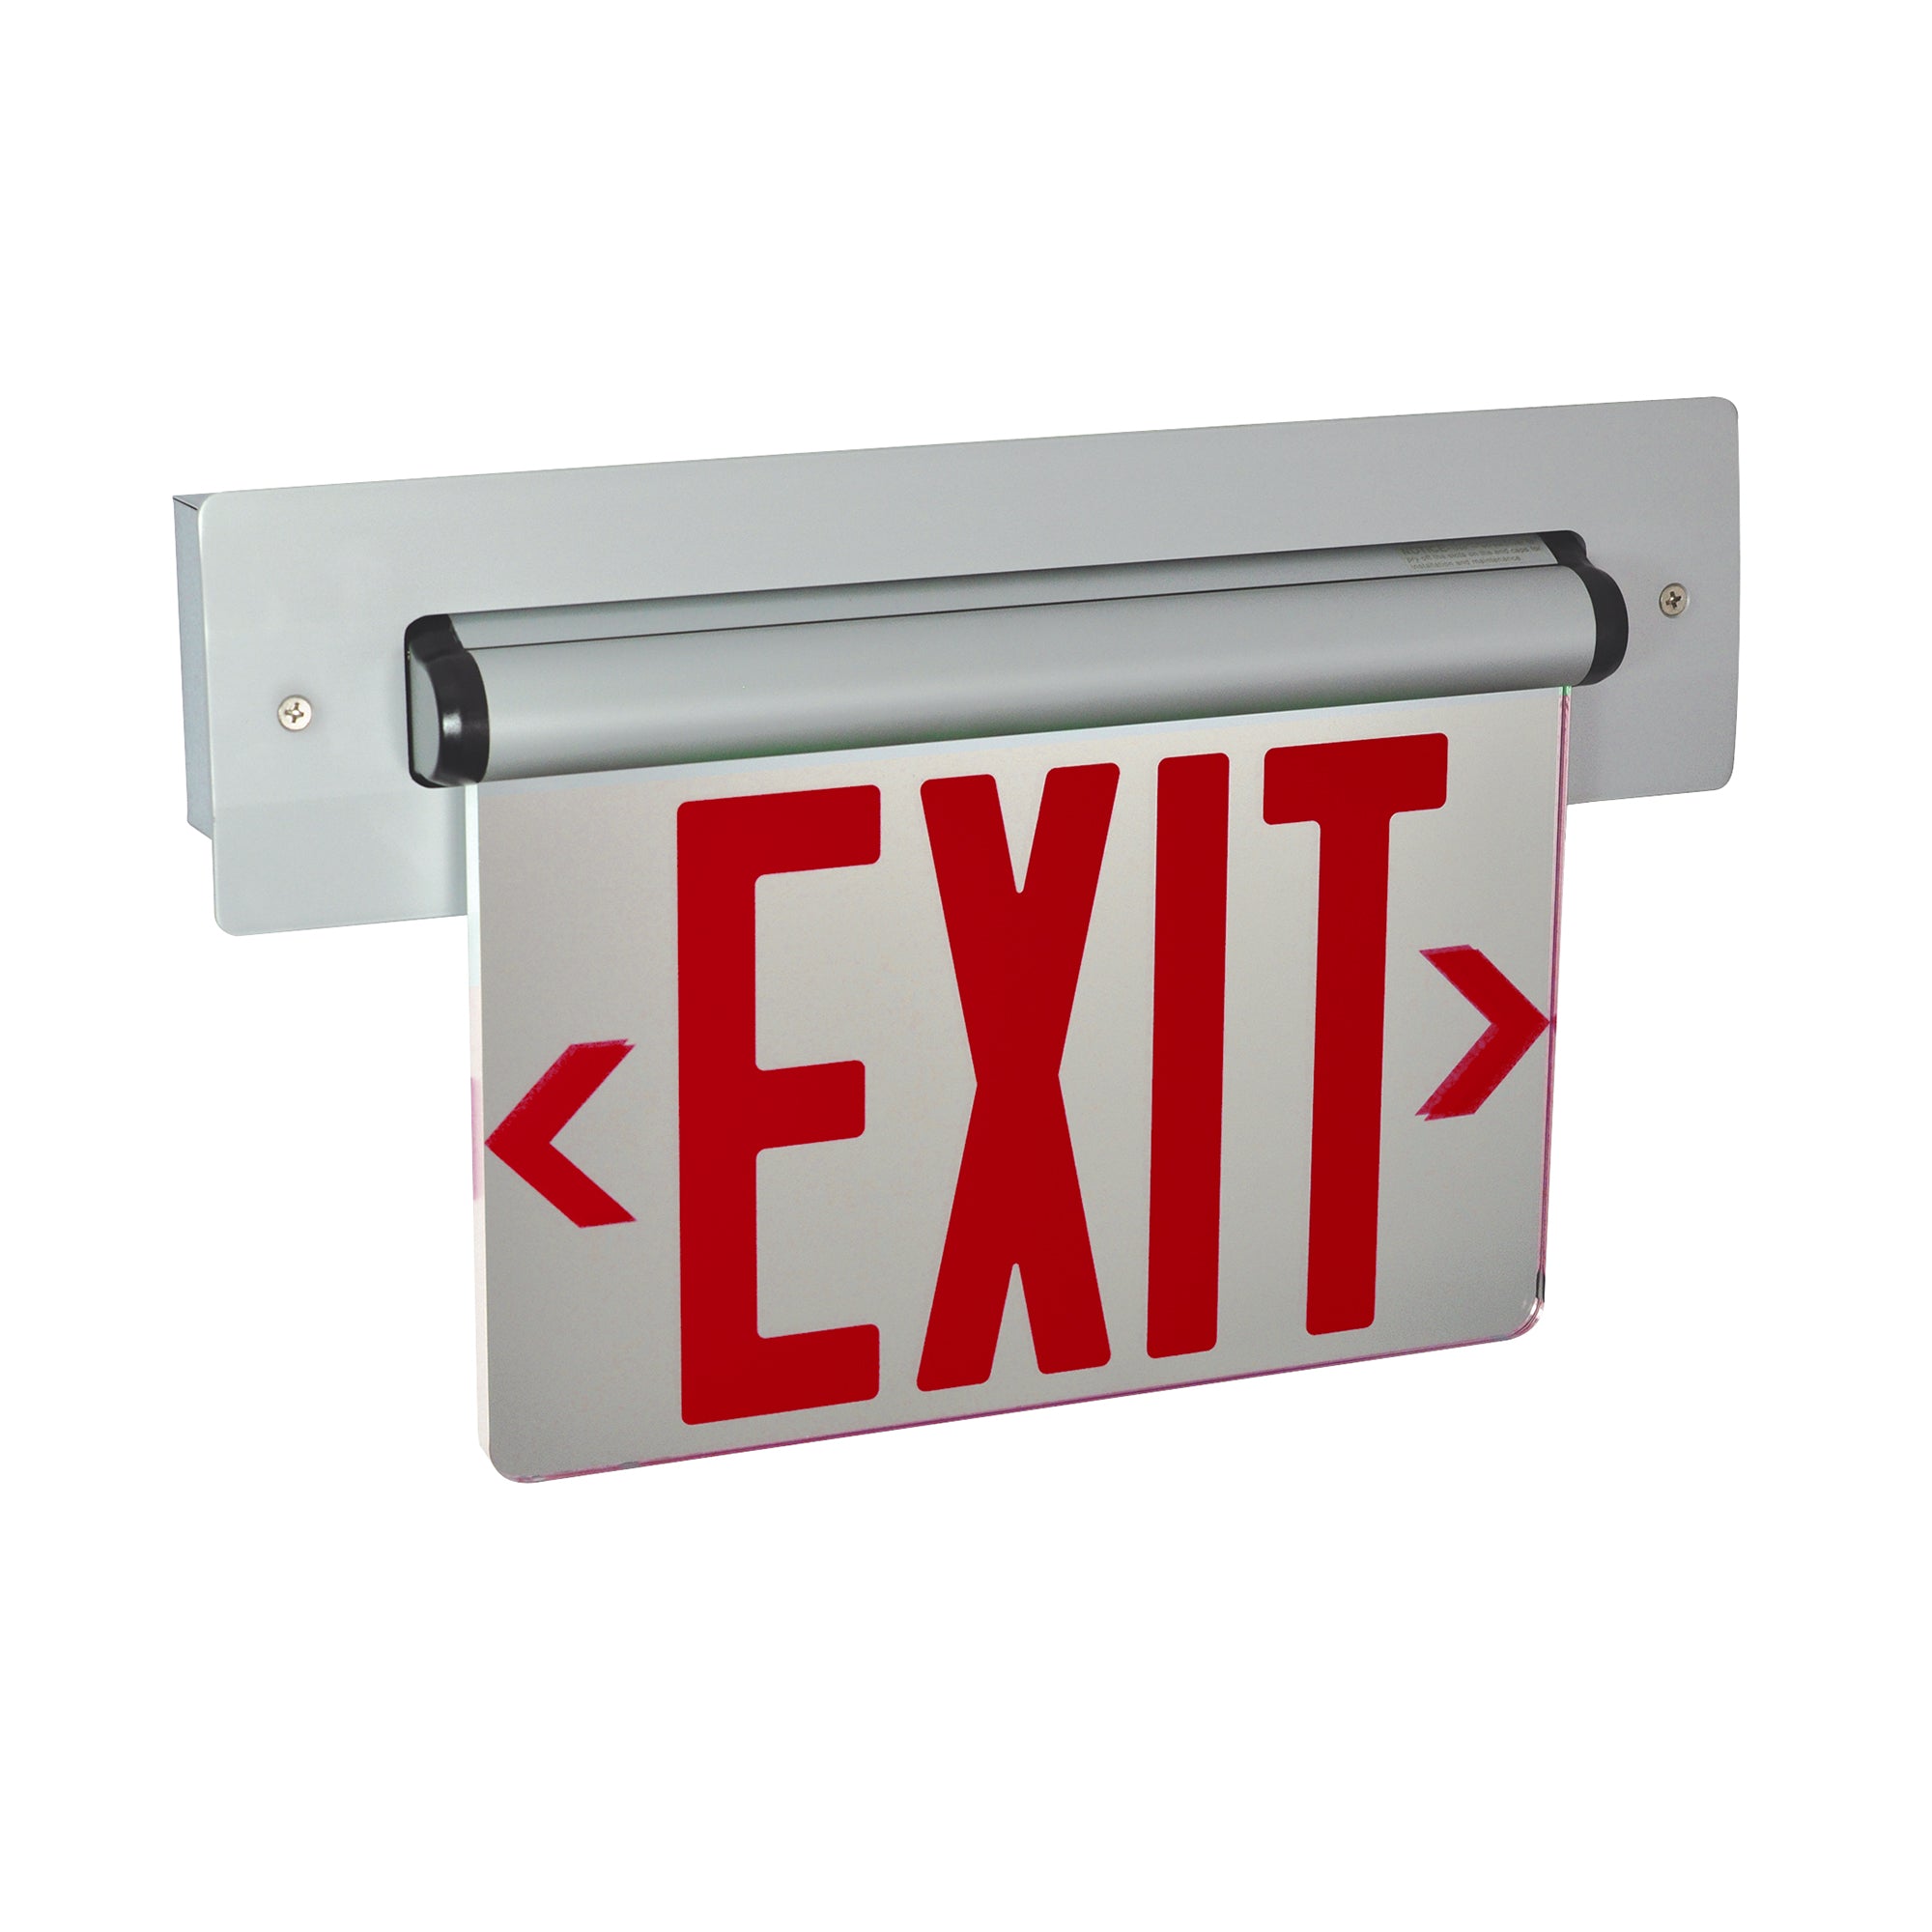 Nora Lighting NX-814-LEDR2MA - Exit / Emergency - Recessed Adjustable LED Edge-Lit Exit Sign, 2 Circuit, 6 Inch Red Letters, Double Face / Mirrored Acrylic, Aluminum Housing